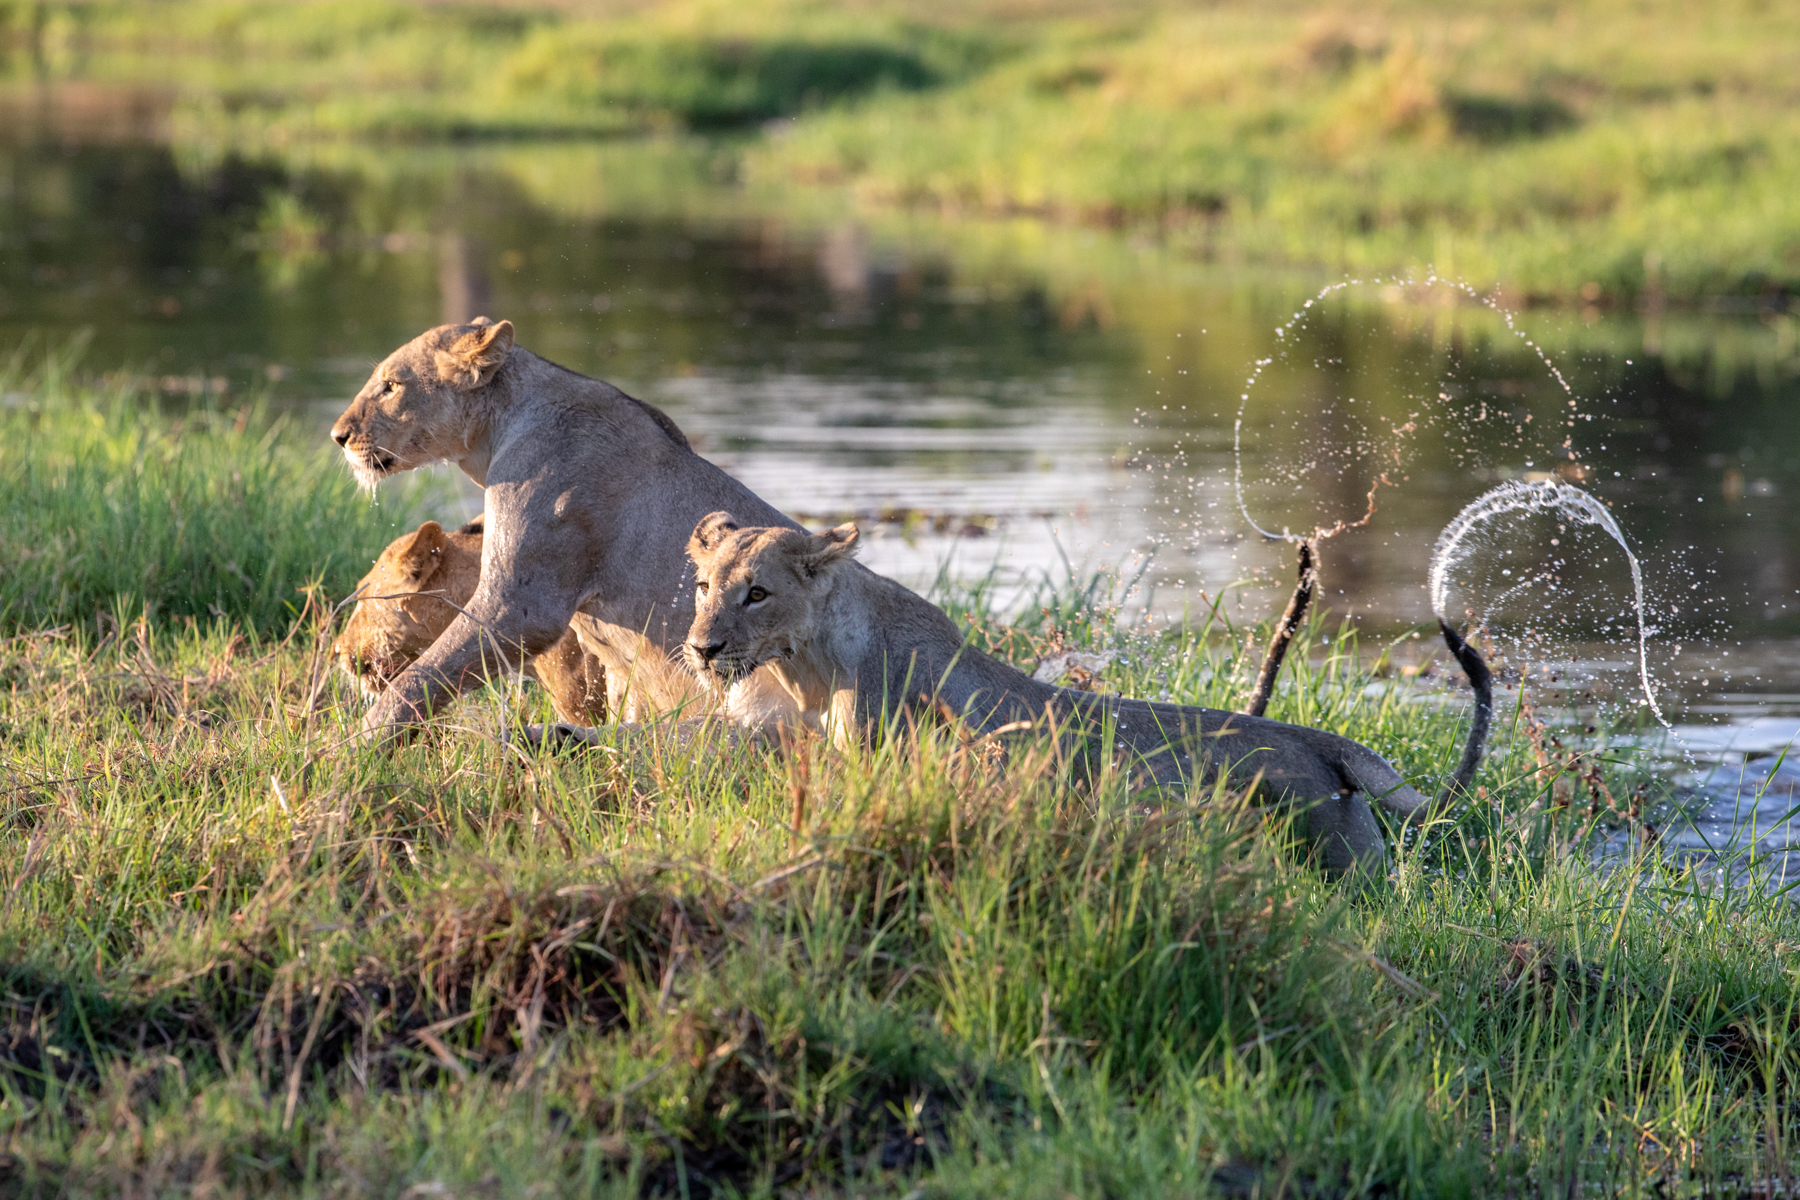 Lionesses shake off the water after a river crossing